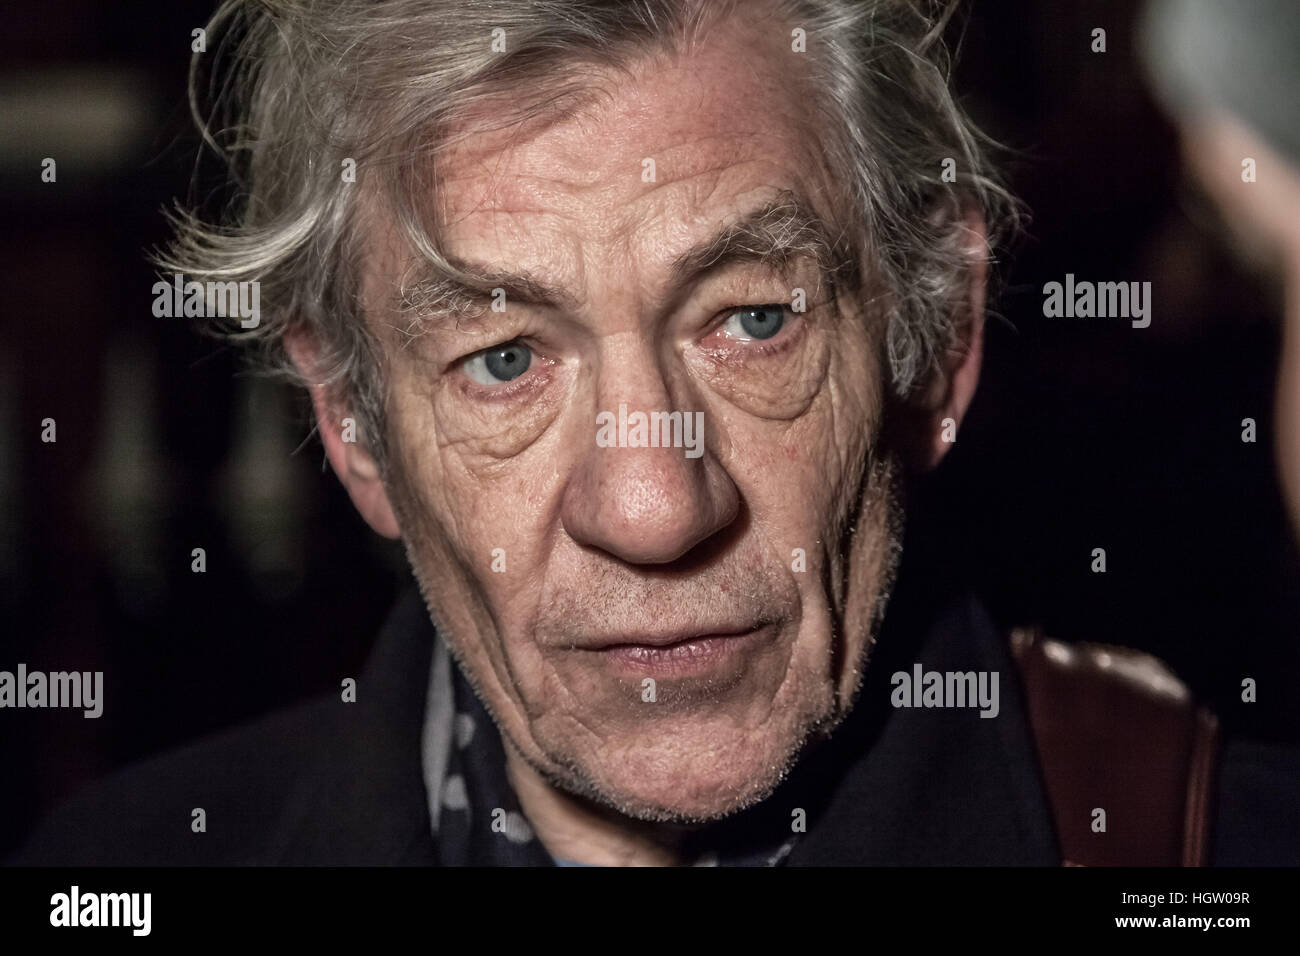 Sir Ian McKellen, British stage and screen actor joins the Free Belarus Now protest outside Belarusian Embassy in London, UK Stock Photo